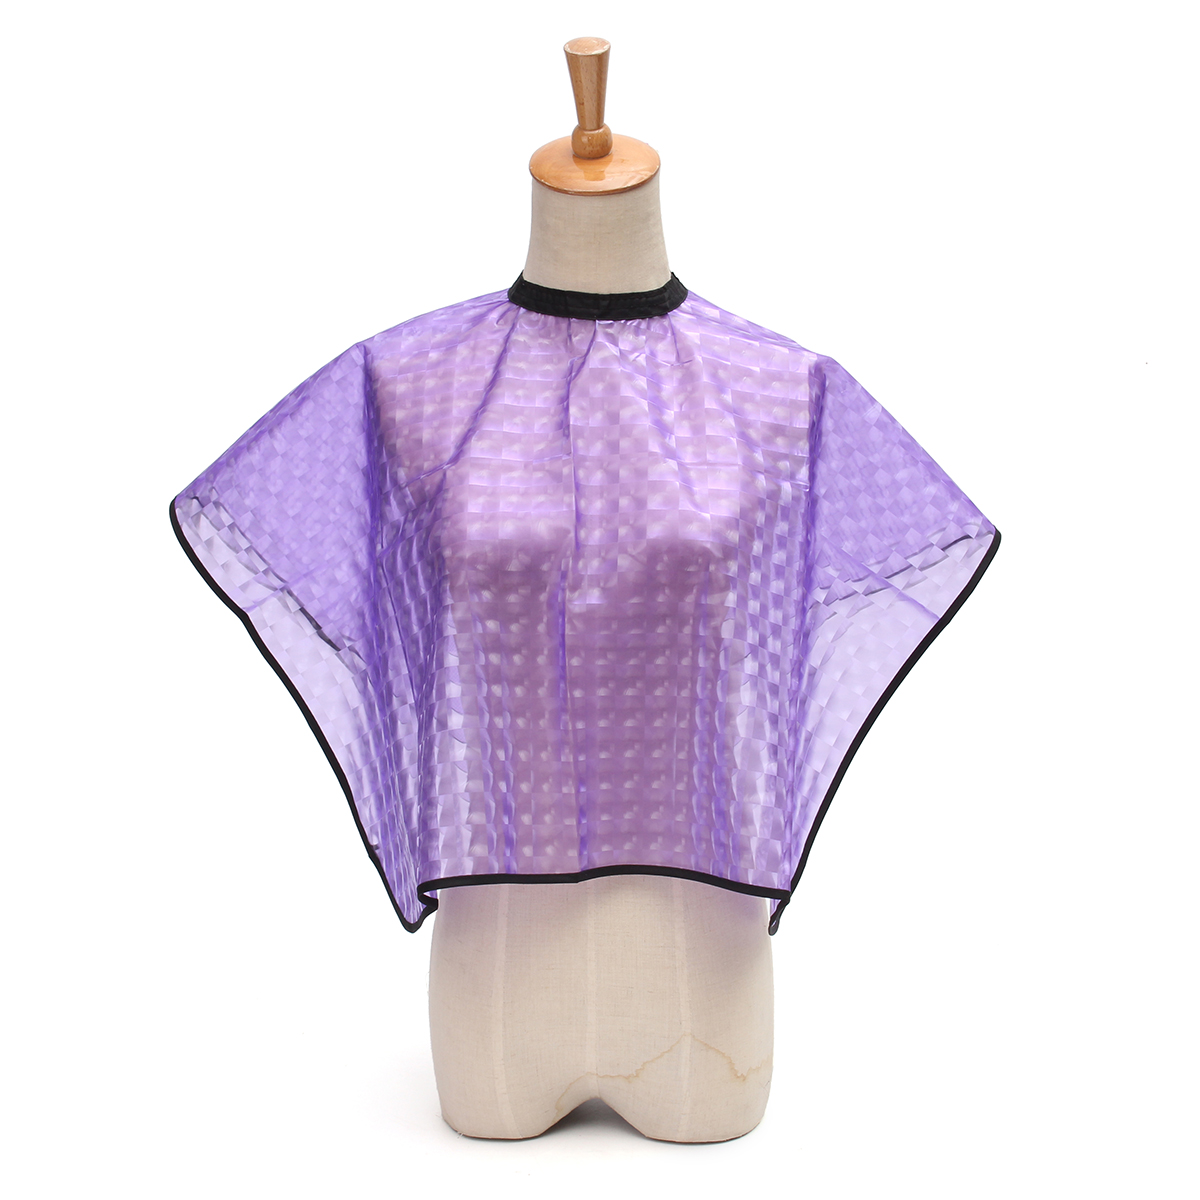 

Purple Hairdressing Robes Waterproof Cutting Cape Gown Cloth Salon Barber Coloring